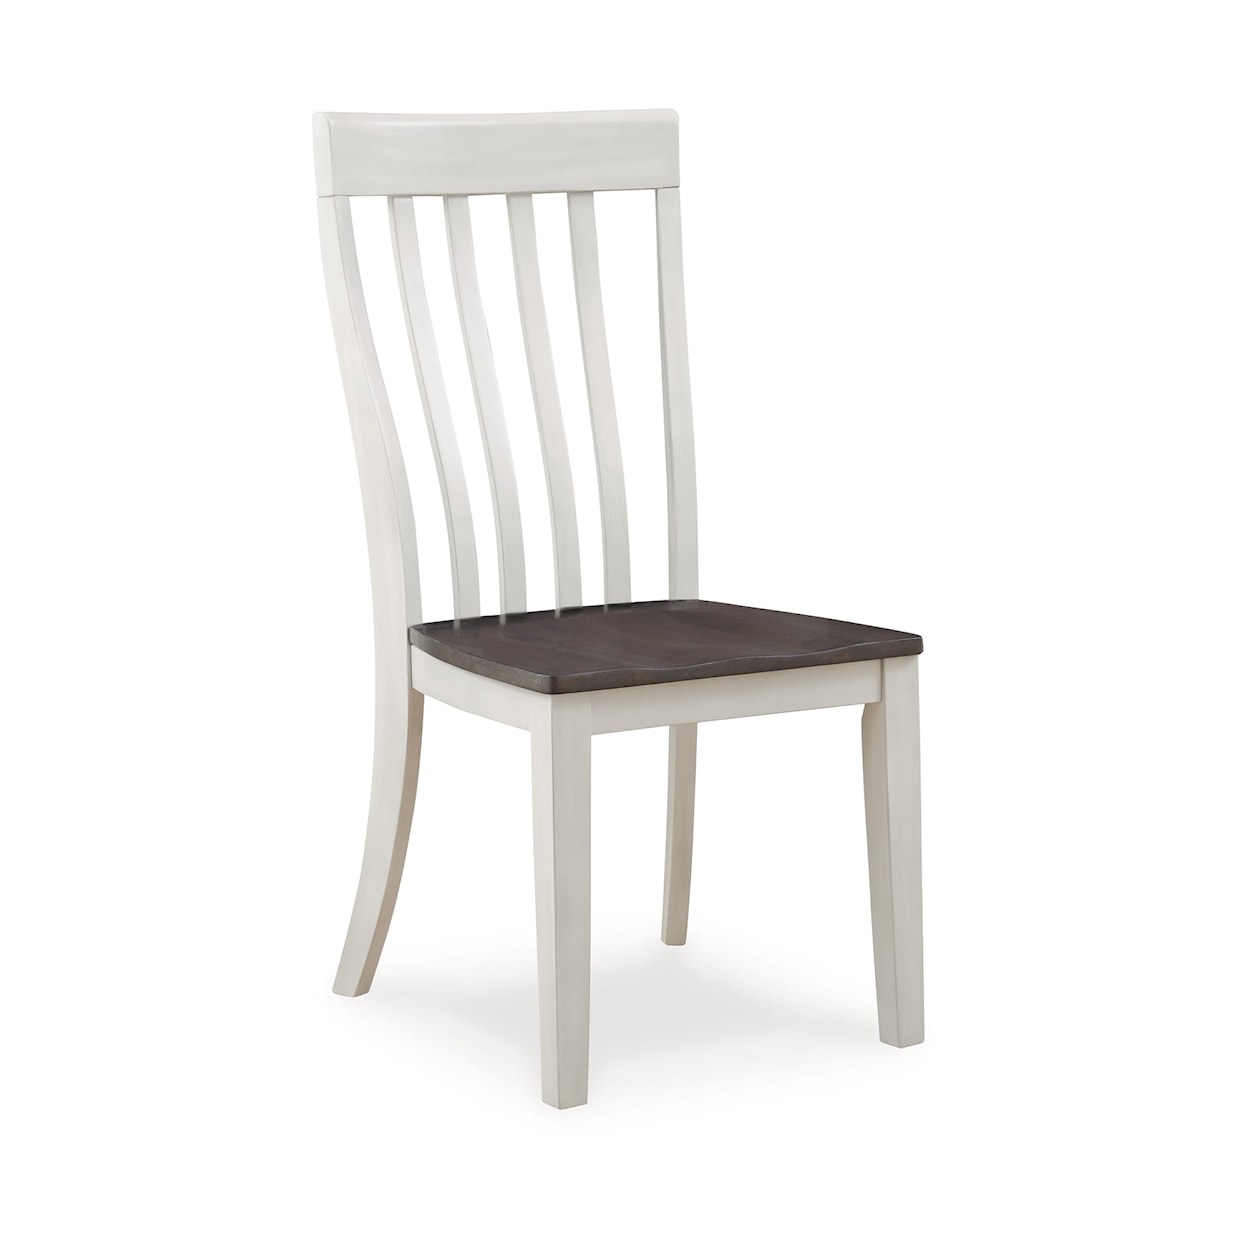 Ashley Furniture Signature Design Darborn Dining Room Side Chair